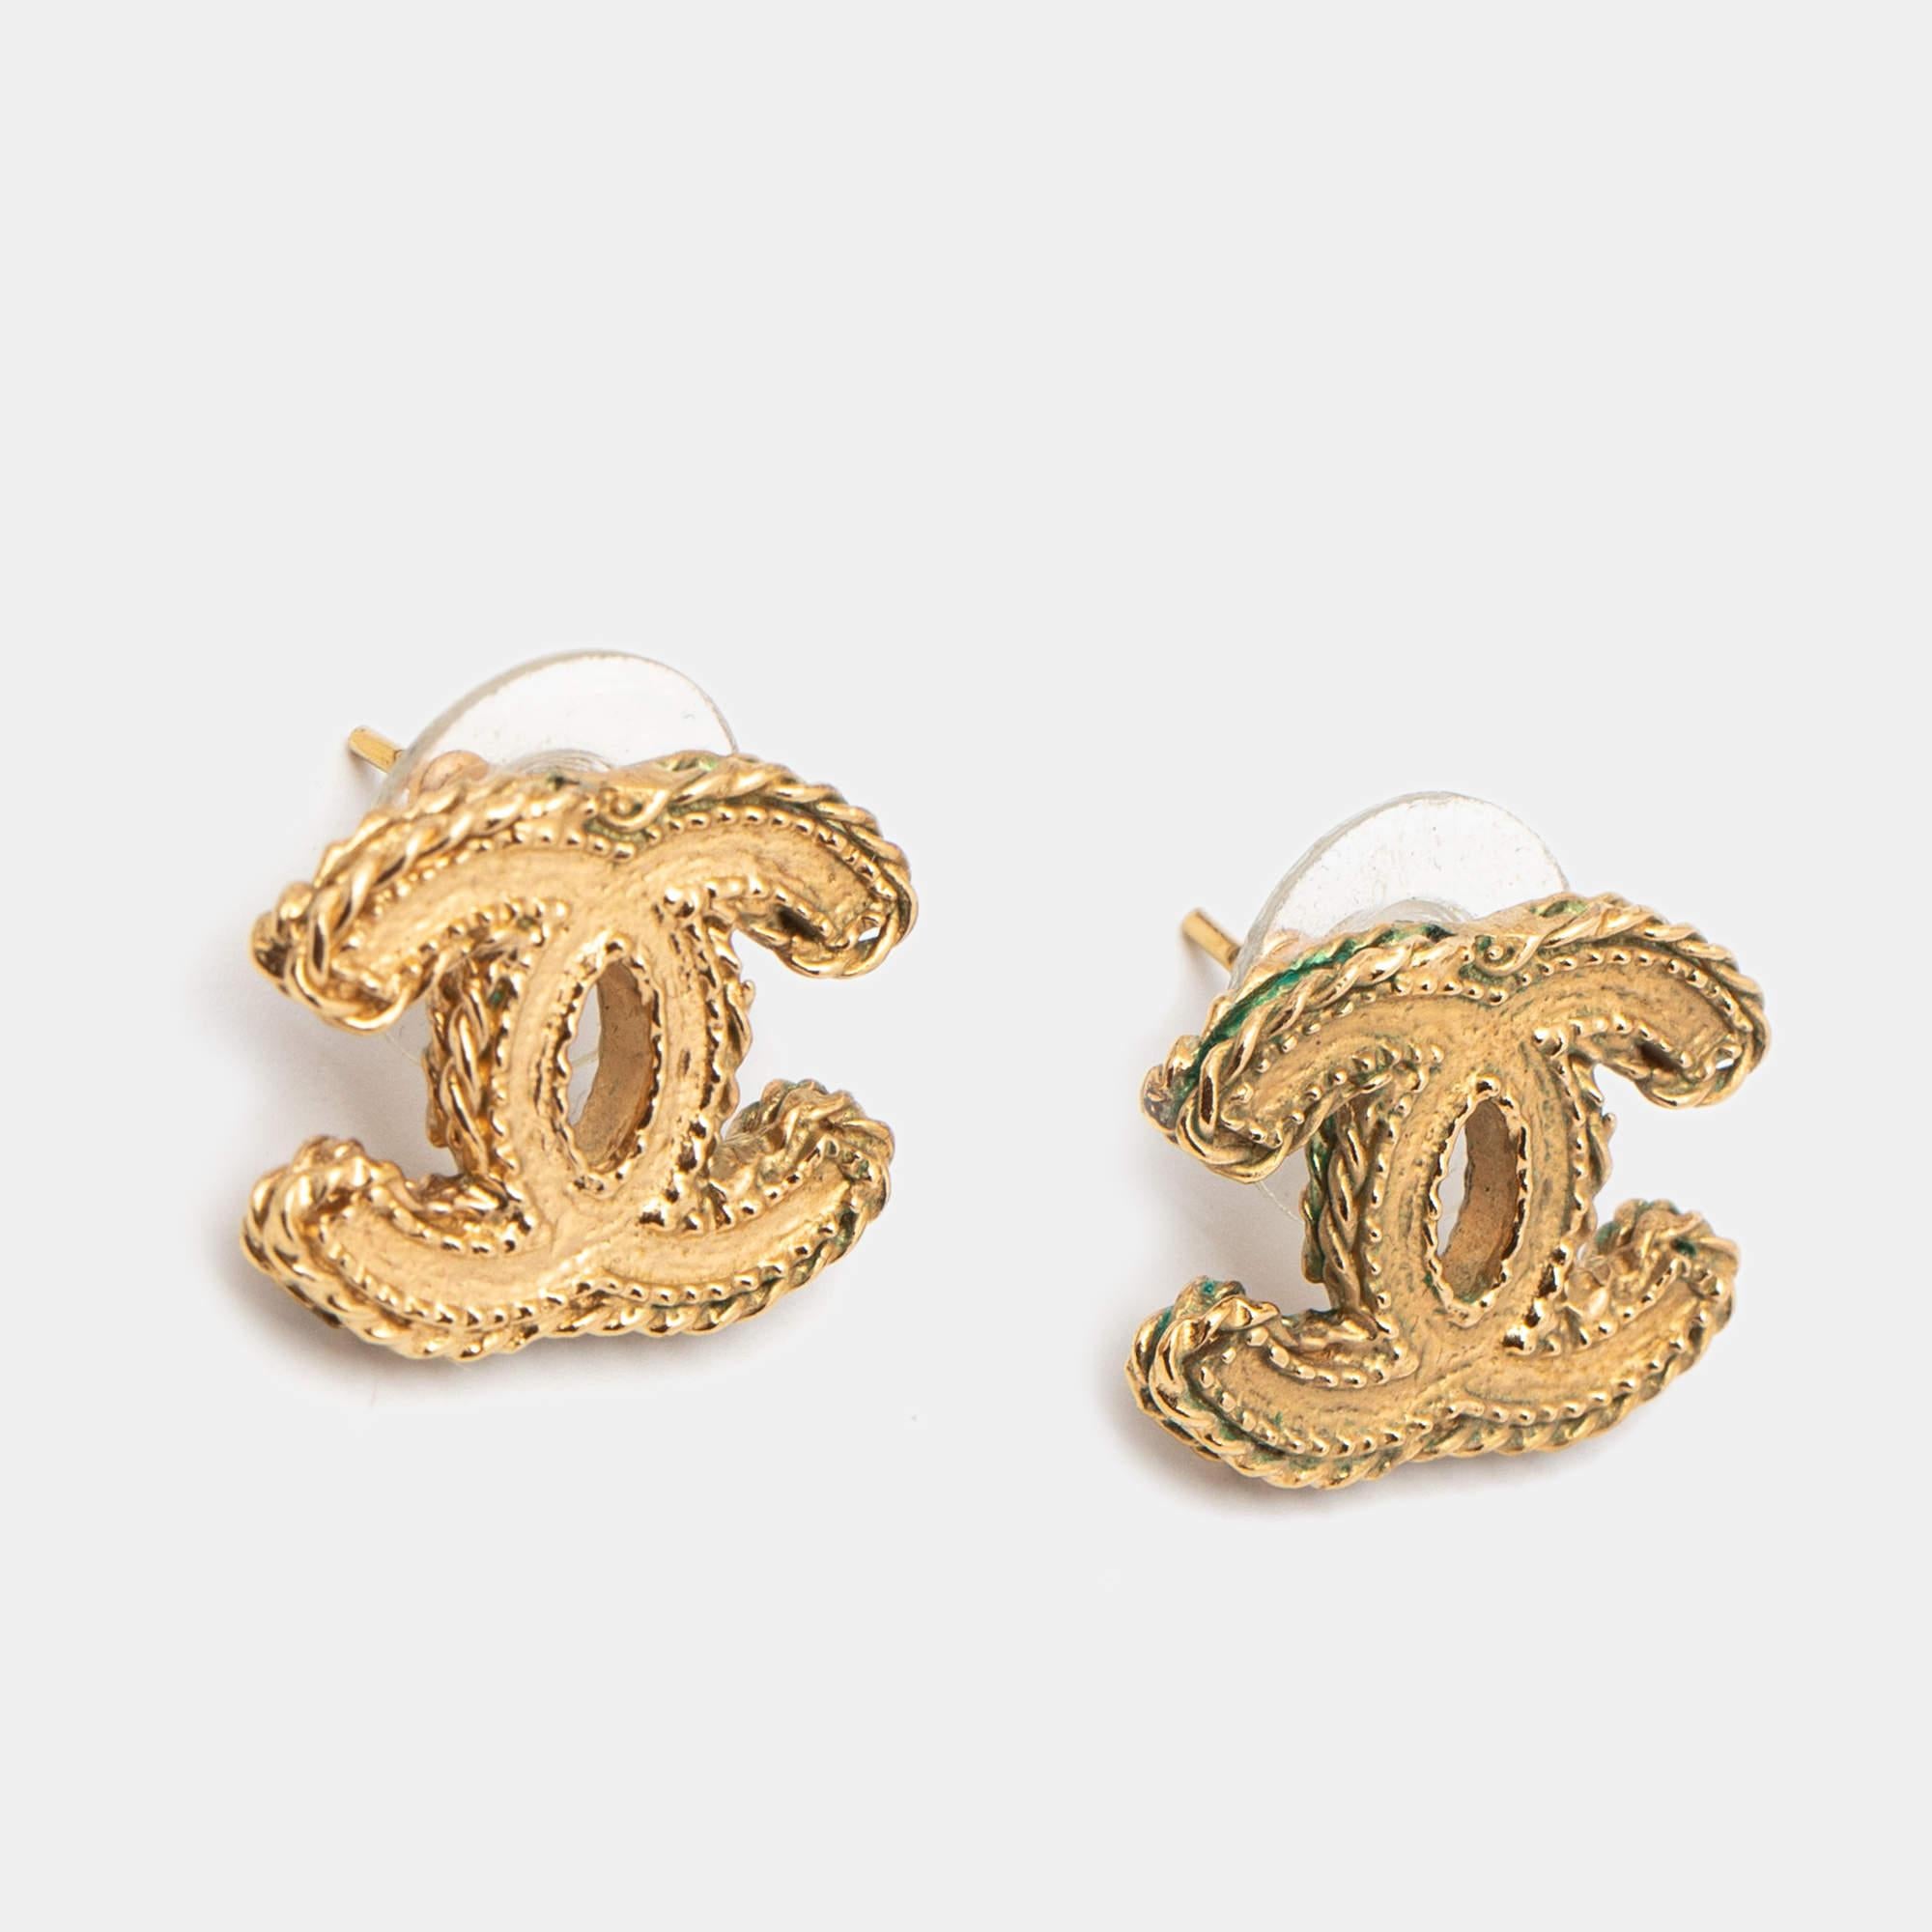 Full of glamour and never-ending classiness, these earrings from the House of Chanel are here to become your favorite accessory! They are fashioned from quality materials with a stunning hue. Bring signature charm to any of your outfits by wearing